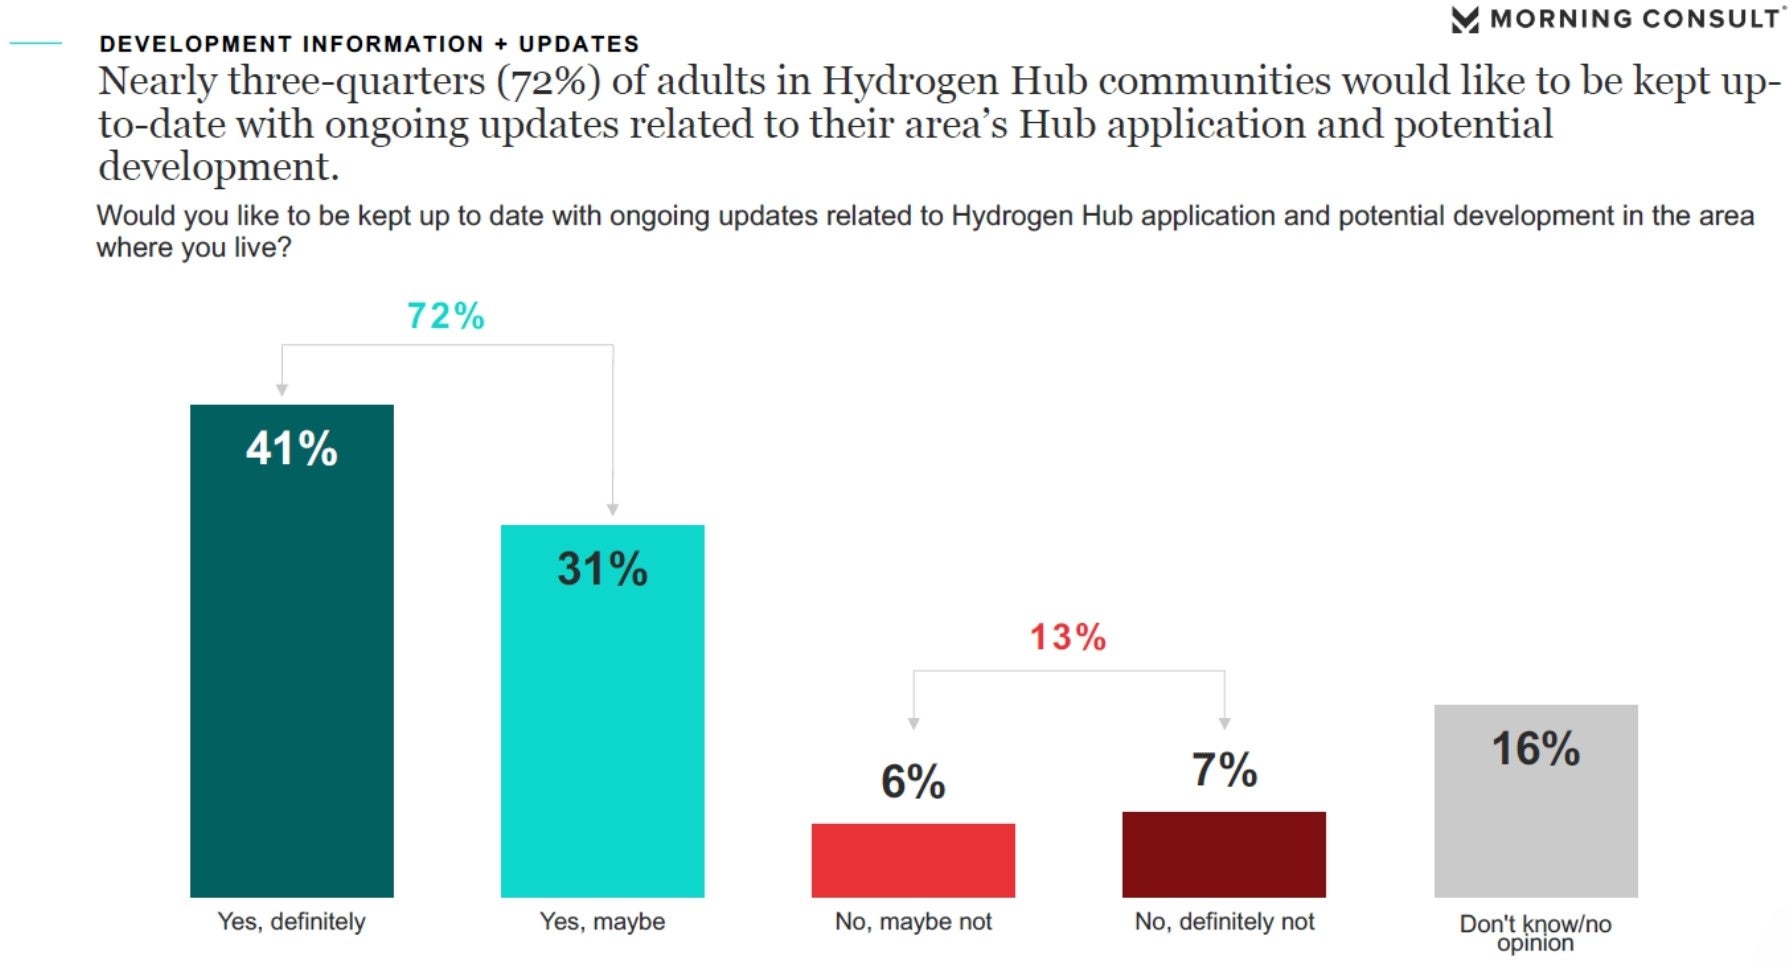 72% of adults in Hydrogen Hubs communities would like to be kept up-to-date with ongoing updates.